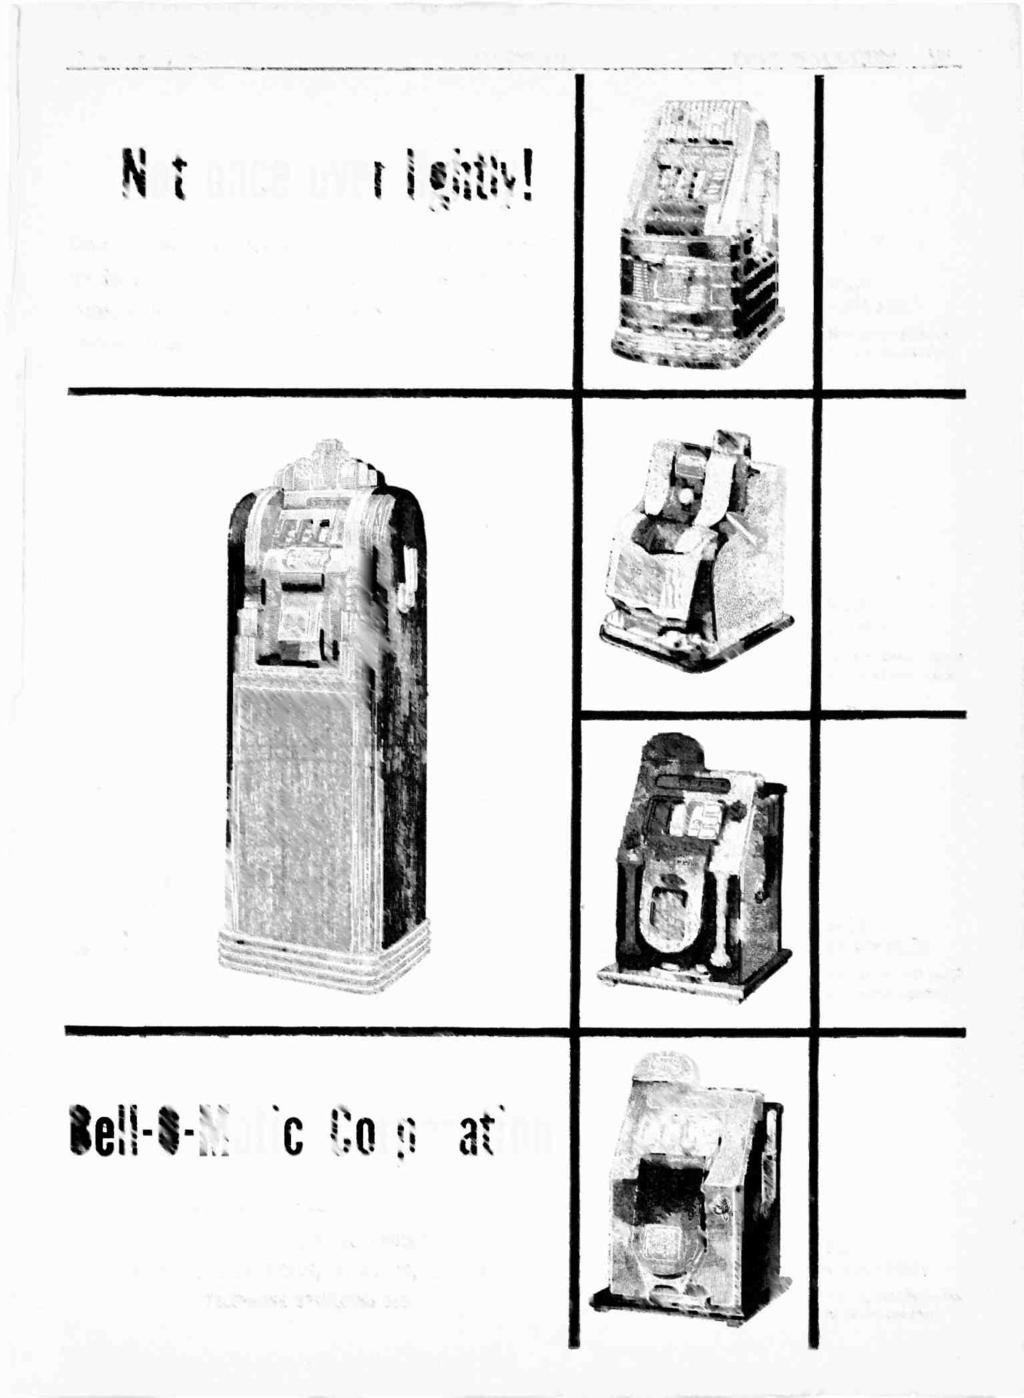 November 15, 1947 The Billboard COIN MACHINES 129 Not once over lightly!